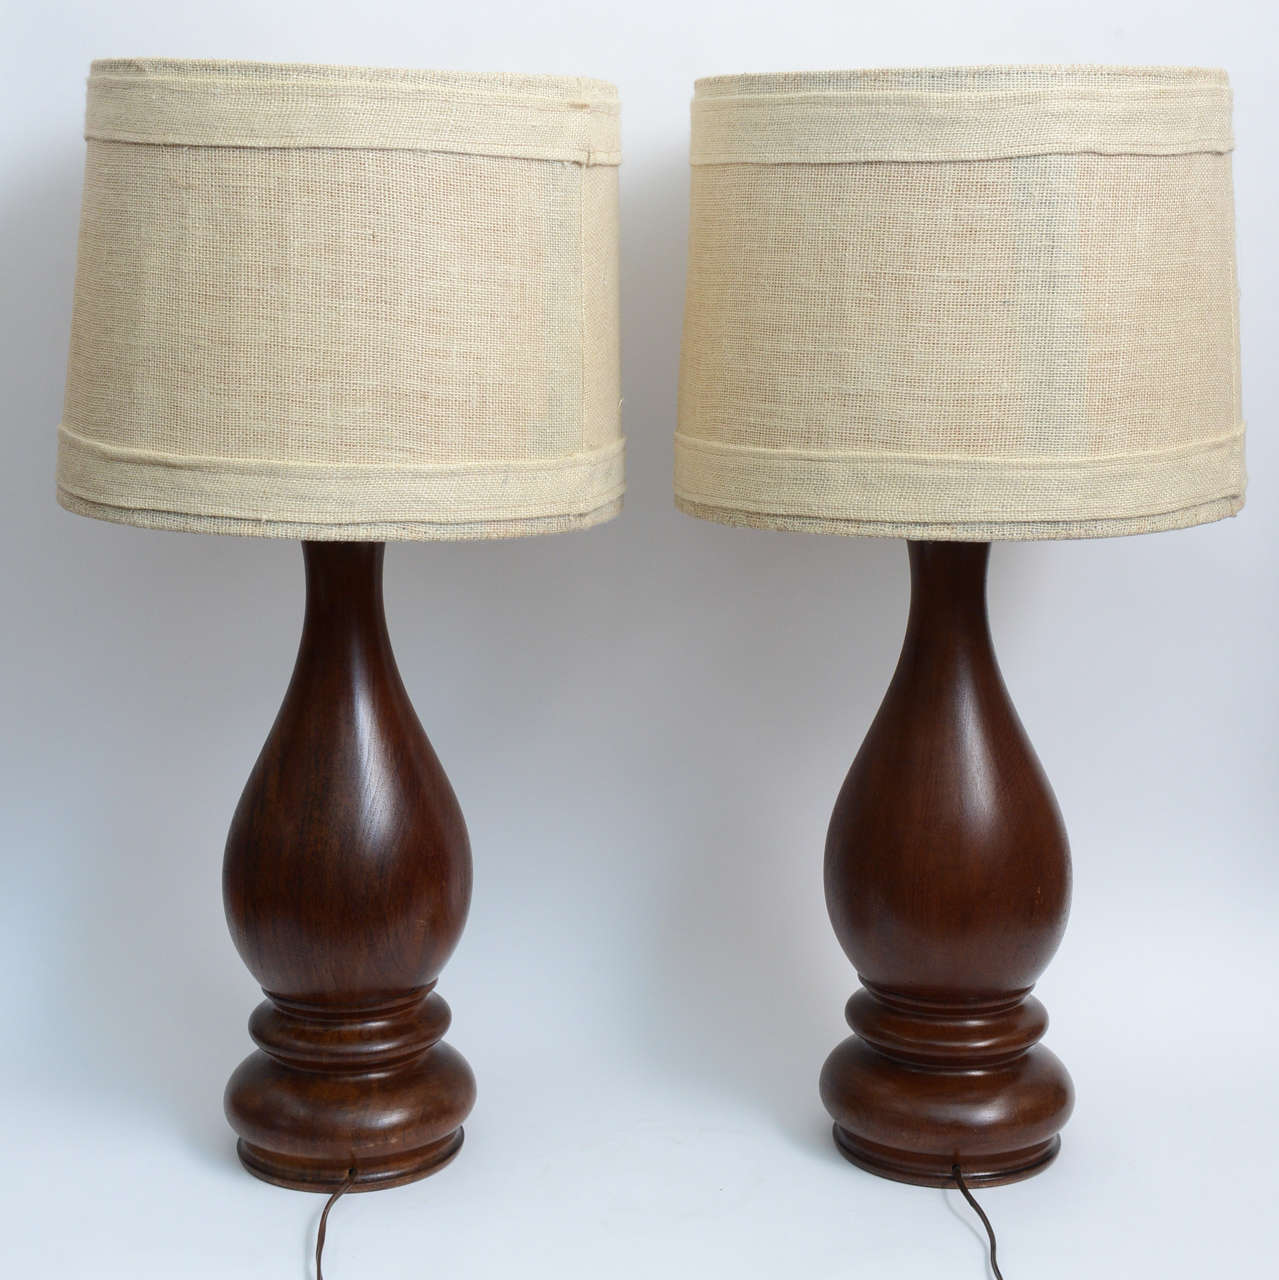 The simple shades and curved lines of these lamps will bring warmth to your room. Original linen open-weave shades give them an organic quality. Beautiful Classic vase-like lines on both lamp bases make them an easy Classic. Lamps are mid-sized.